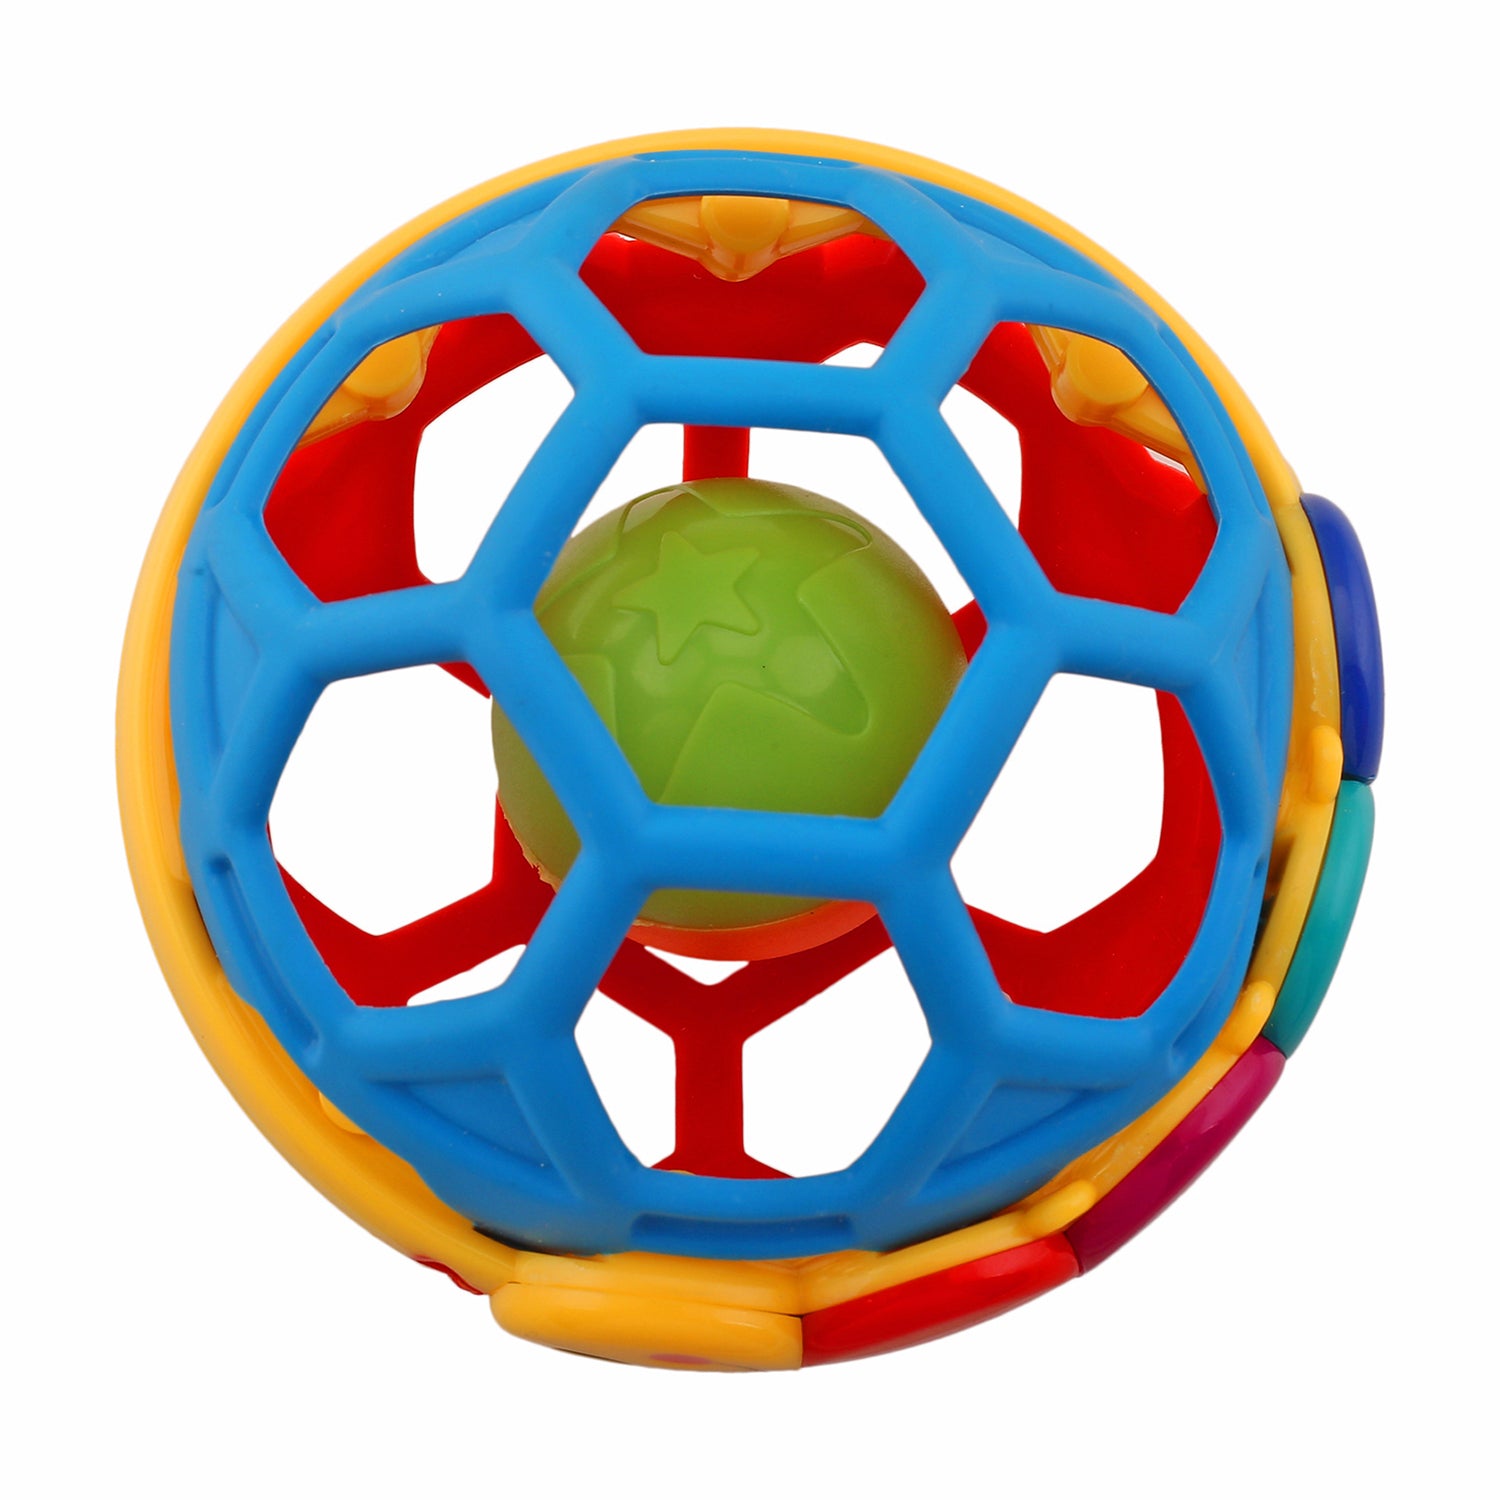 Catch Me Multicolour Rattle Ball - Baby Moo